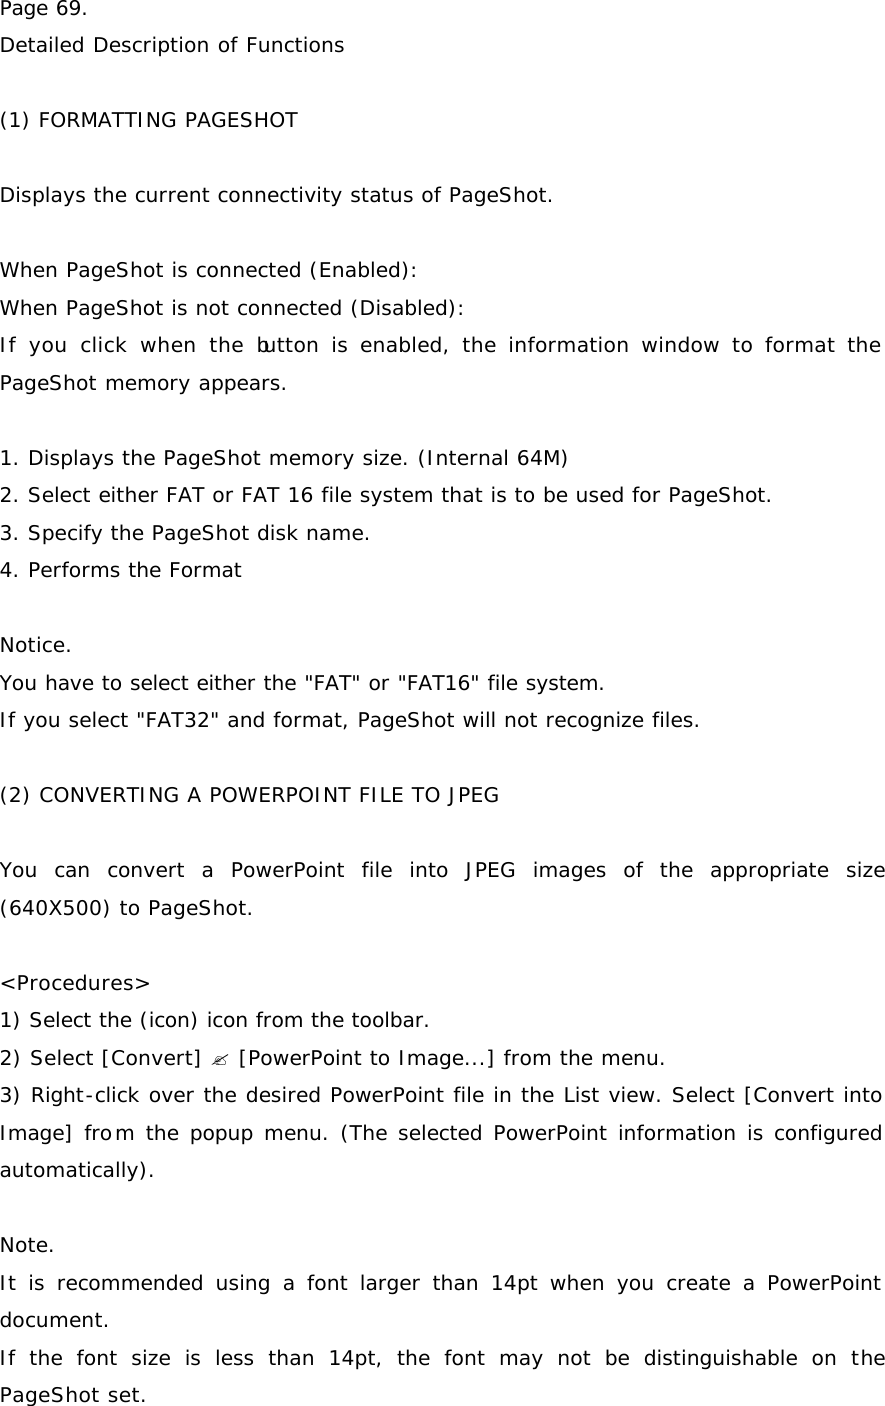 Page 69. Detailed Description of Functions  (1) FORMATTING PAGESHOT  Displays the current connectivity status of PageShot.    When PageShot is connected (Enabled):  When PageShot is not connected (Disabled):  If you click when the button is enabled, the information window to format the PageShot memory appears.   1. Displays the PageShot memory size. (Internal 64M) 2. Select either FAT or FAT 16 file system that is to be used for PageShot.  3. Specify the PageShot disk name. 4. Performs the Format  Notice. You have to select either the &quot;FAT&quot; or &quot;FAT16&quot; file system. If you select &quot;FAT32&quot; and format, PageShot will not recognize files.  (2) CONVERTING A POWERPOINT FILE TO JPEG  You can convert a PowerPoint file into JPEG images of the appropriate size (640X500) to PageShot.   &lt;Procedures&gt; 1) Select the (icon) icon from the toolbar.  2) Select [Convert] ? [PowerPoint to Image...] from the menu.  3) Right-click over the desired PowerPoint file in the List view. Select [Convert into Image] from the popup menu. (The selected PowerPoint information is configured automatically).  Note. It is recommended using a font larger than 14pt when you create a PowerPoint document.  If the font size is less than 14pt, the font may not be distinguishable on the PageShot set. 